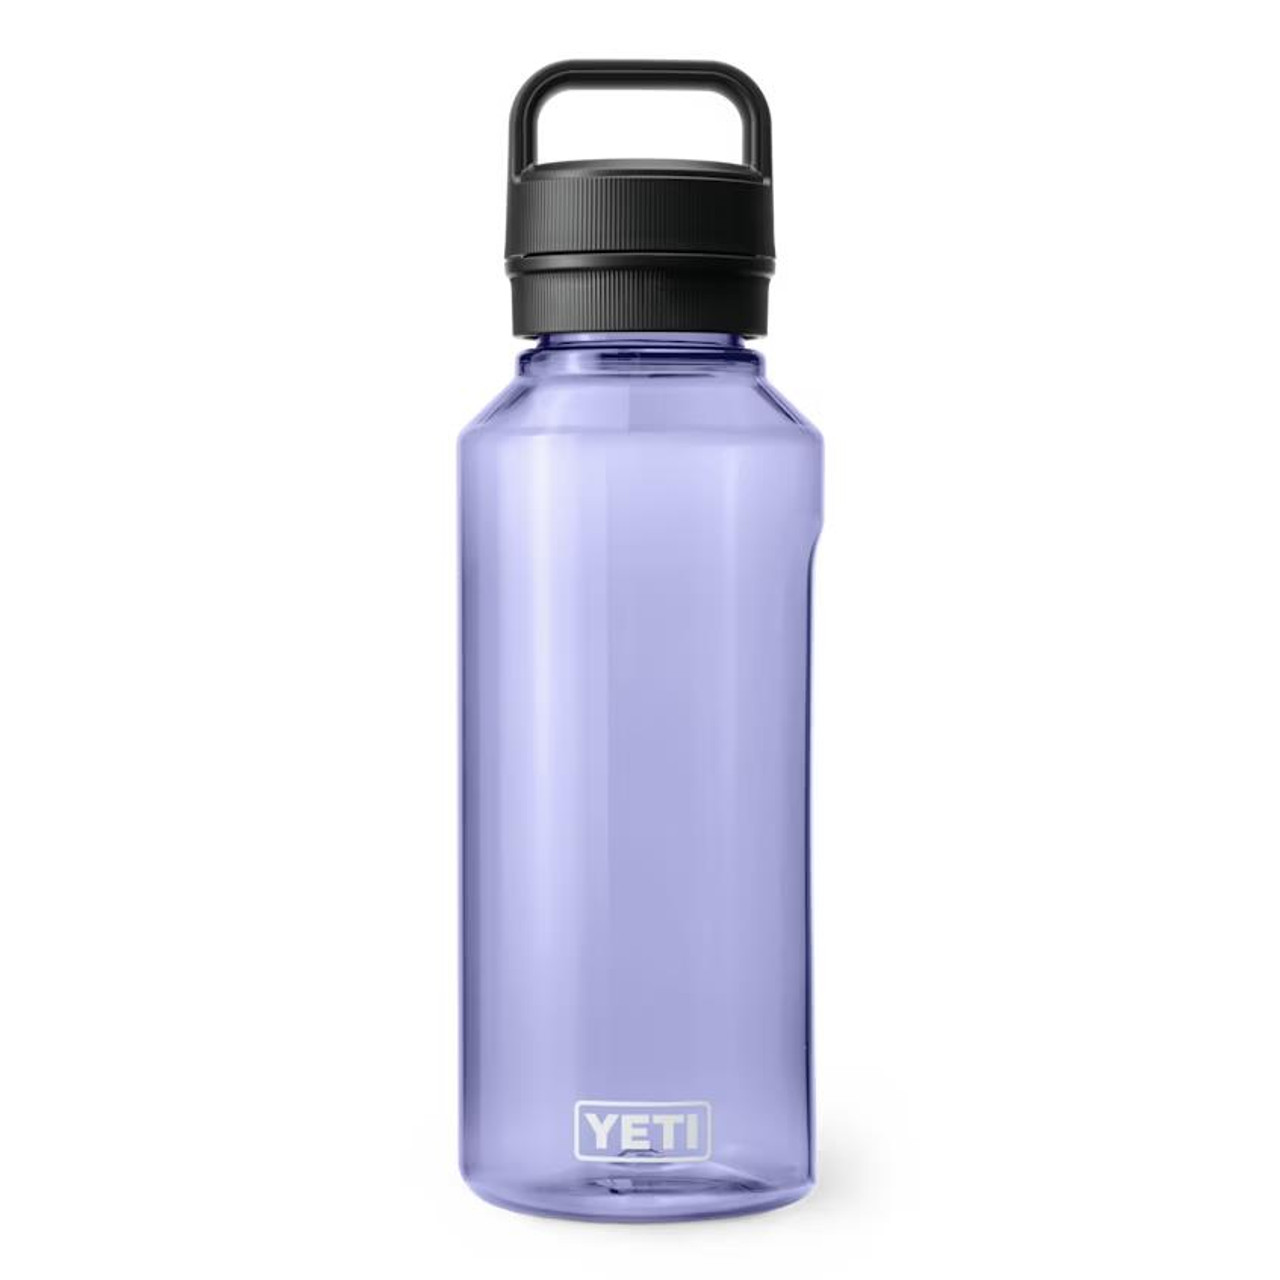 https://cdn11.bigcommerce.com/s-0xmhwue6/images/stencil/1280x1280/products/28617/70216/YETI-Yonder-50oz-Water-Bottle-Cosmic-Lilac-888830277287_image1__40795.1694704924.jpg?c=2